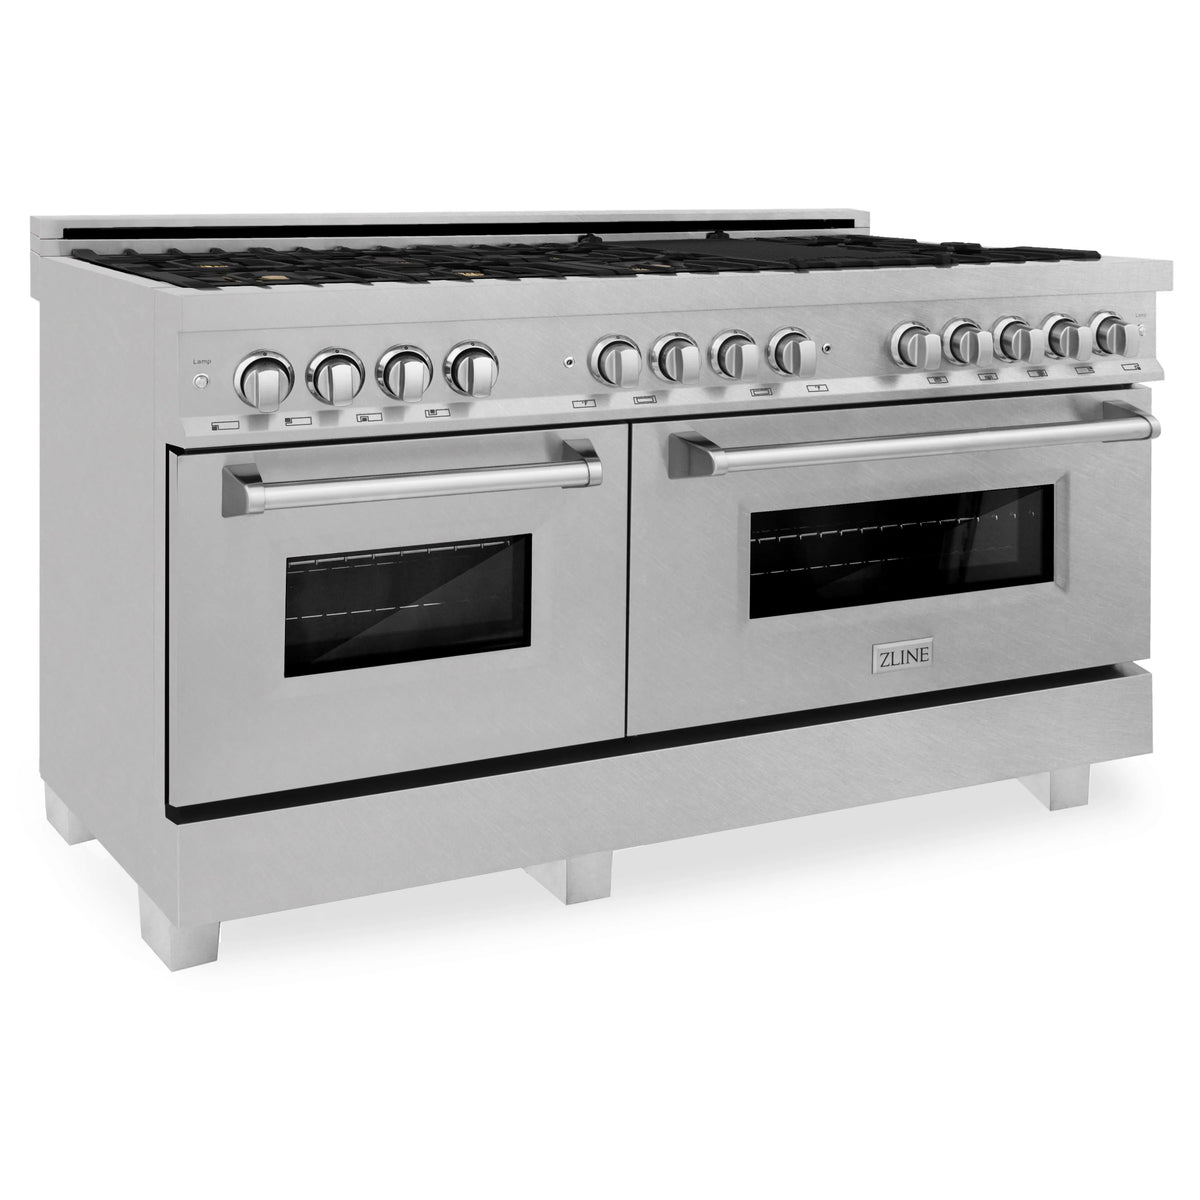 ZLINE 60 7.4 Cu. ft. Dual Fuel Range with GAS Stove and Electric Oven in DuraSnow Stainless Steel with Brass Burners (RAS-SN-BR-60)